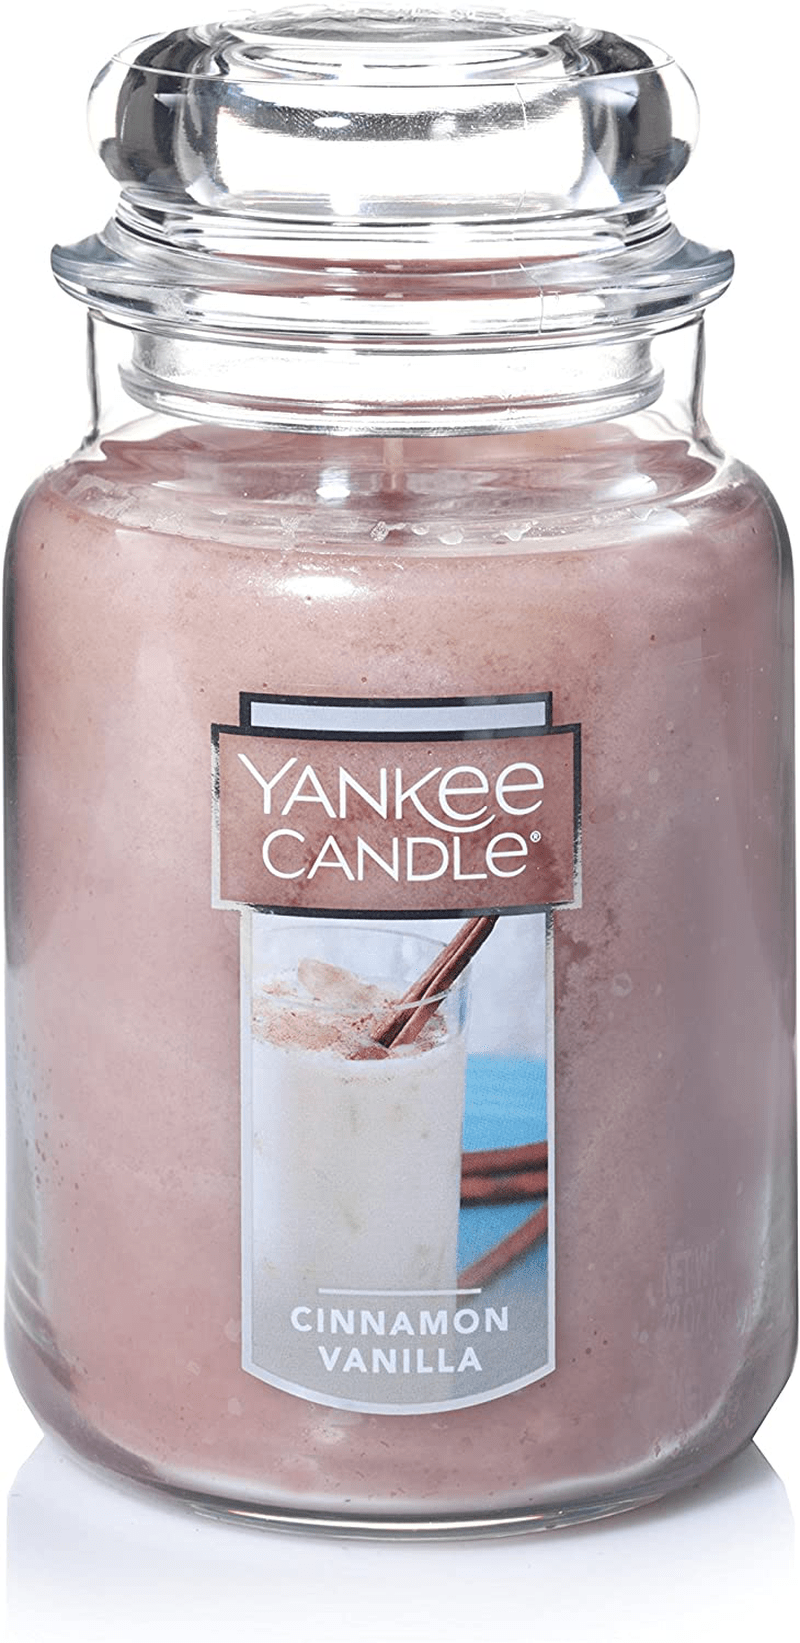 Yankee Candle Large Jar Candle Home Sweet Home Home & Garden > Decor > Home Fragrances > Candles Yankee Candle Cinnamon Vanilla Large Jar 